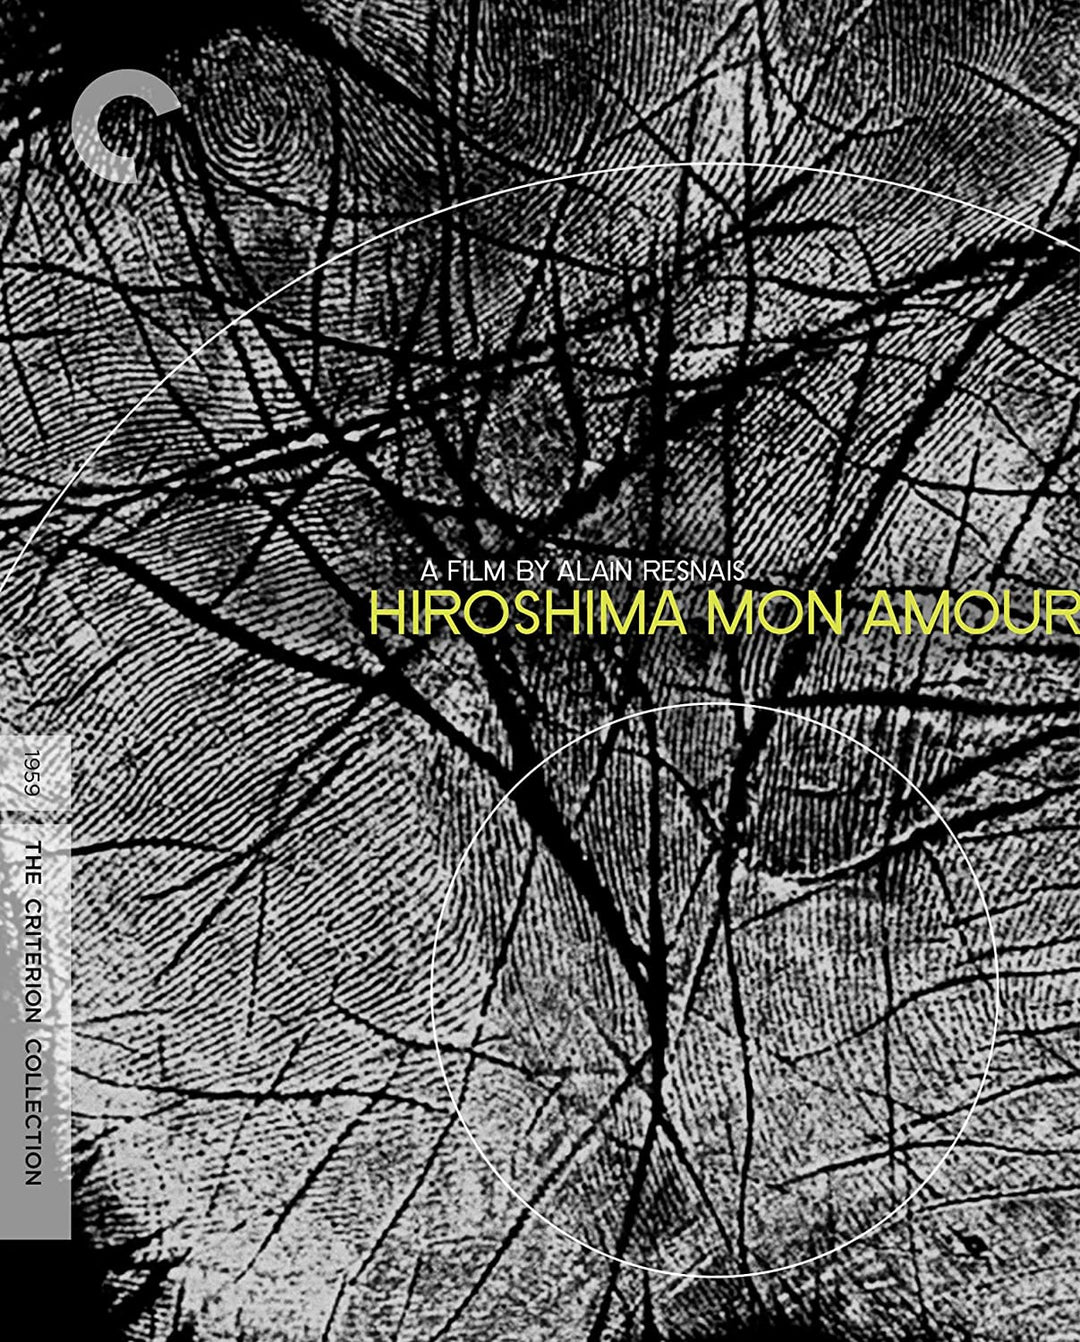 Hiroshima Mon Amour (1959) (Criterion Collection) UK Only  [2021] - Romance/War [Blu-ray]